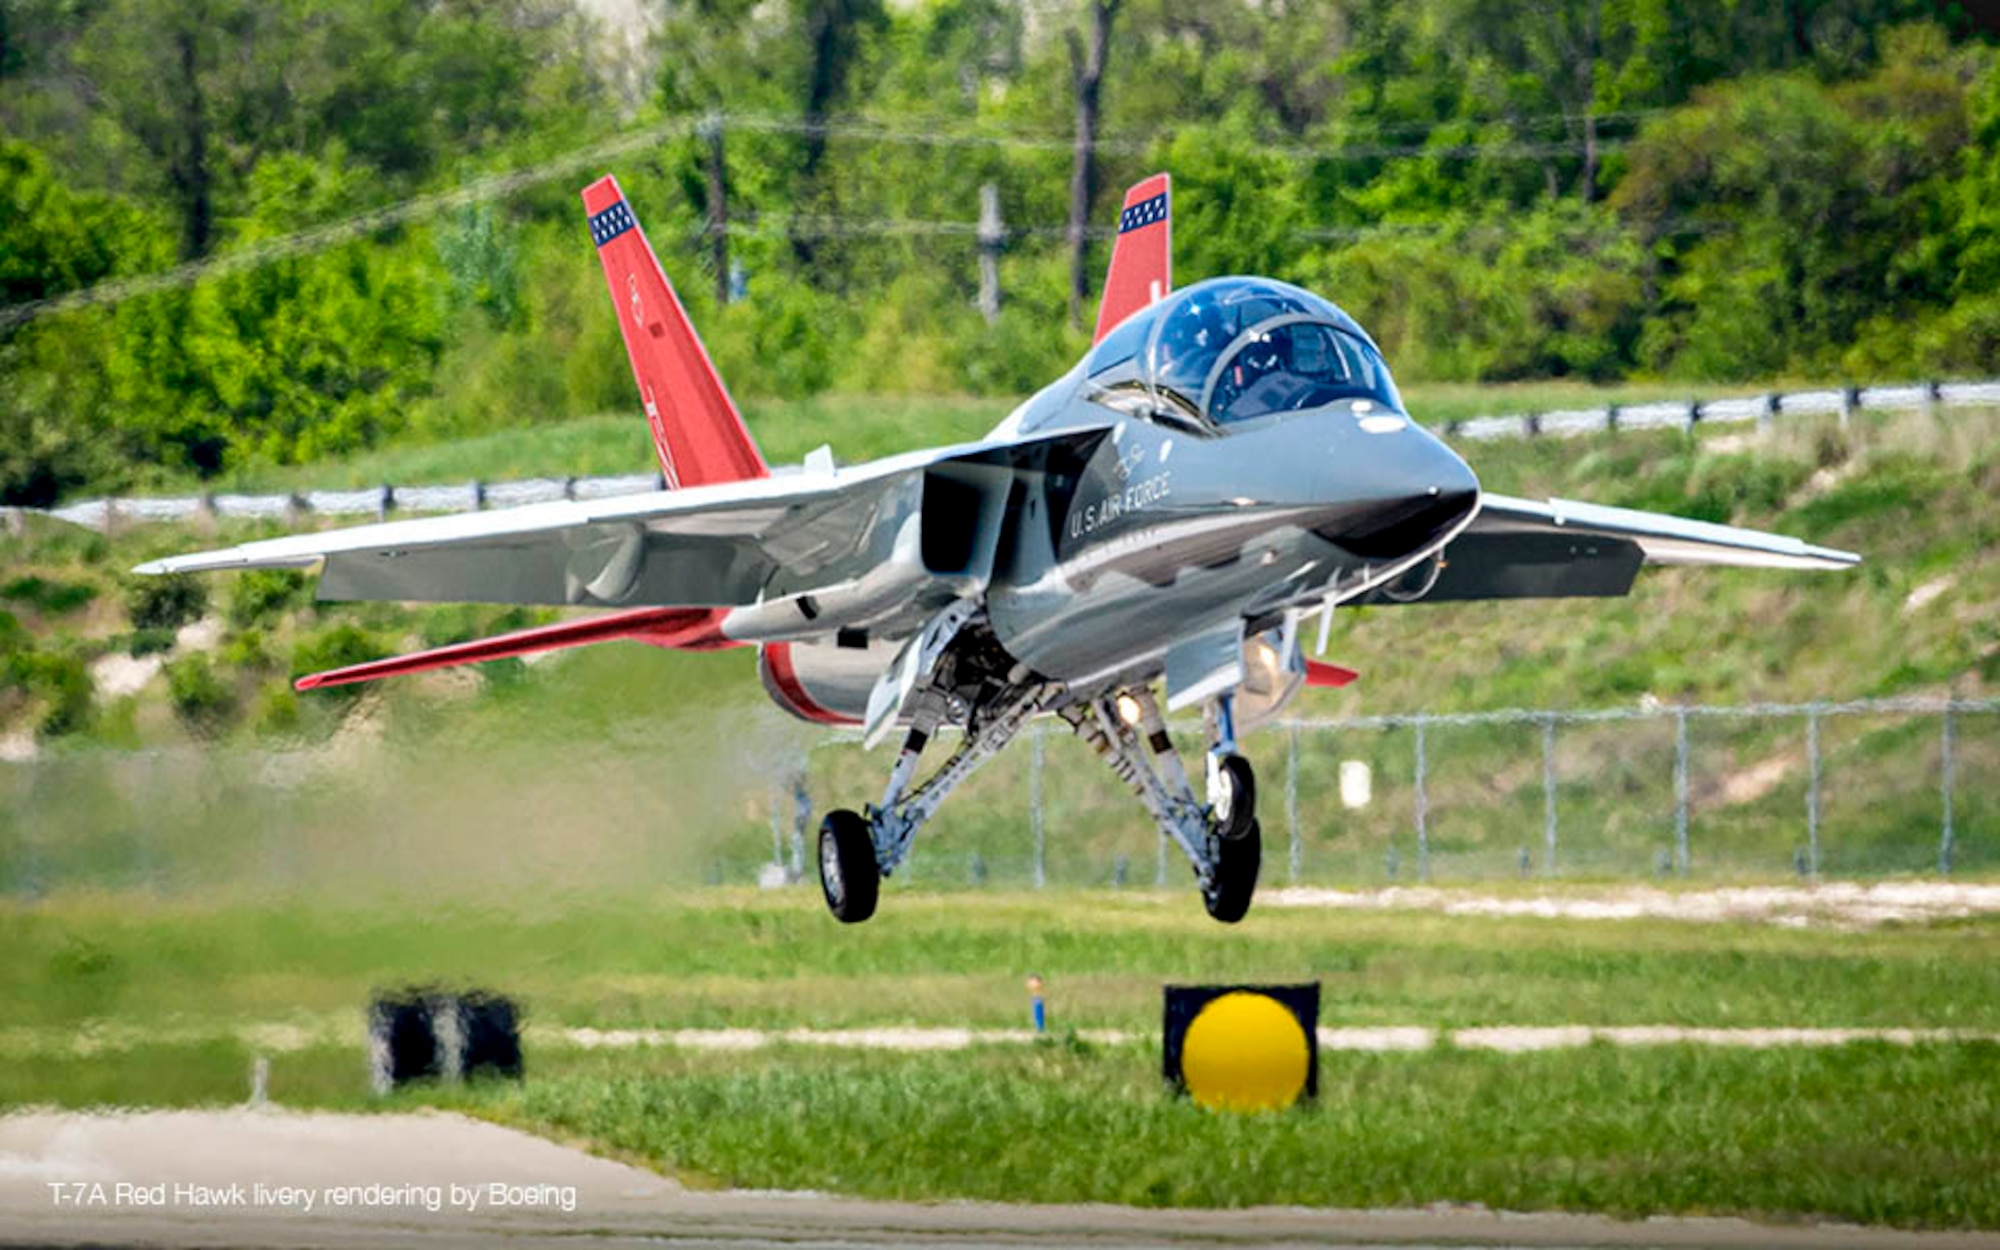 eT-7A aircraft T2 takes off on its first flight and taxi test test on April 24, 2017.